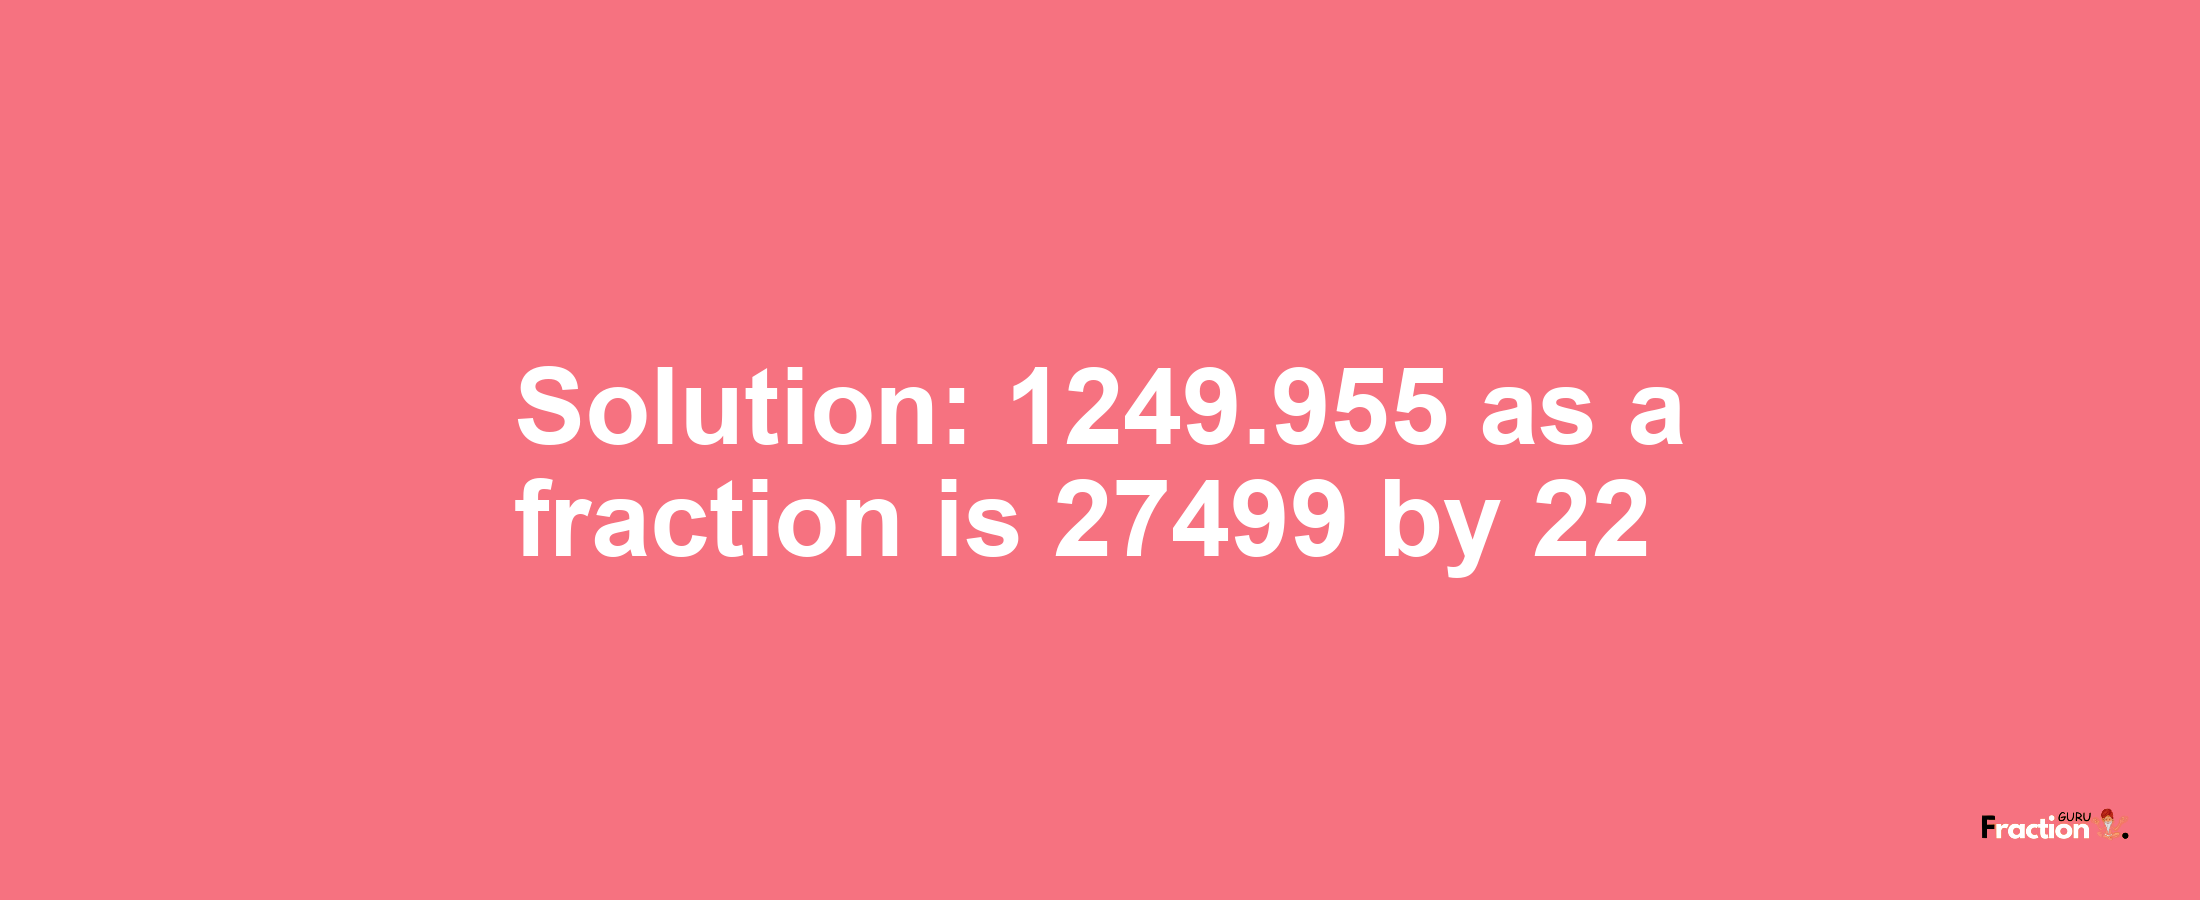 Solution:1249.955 as a fraction is 27499/22